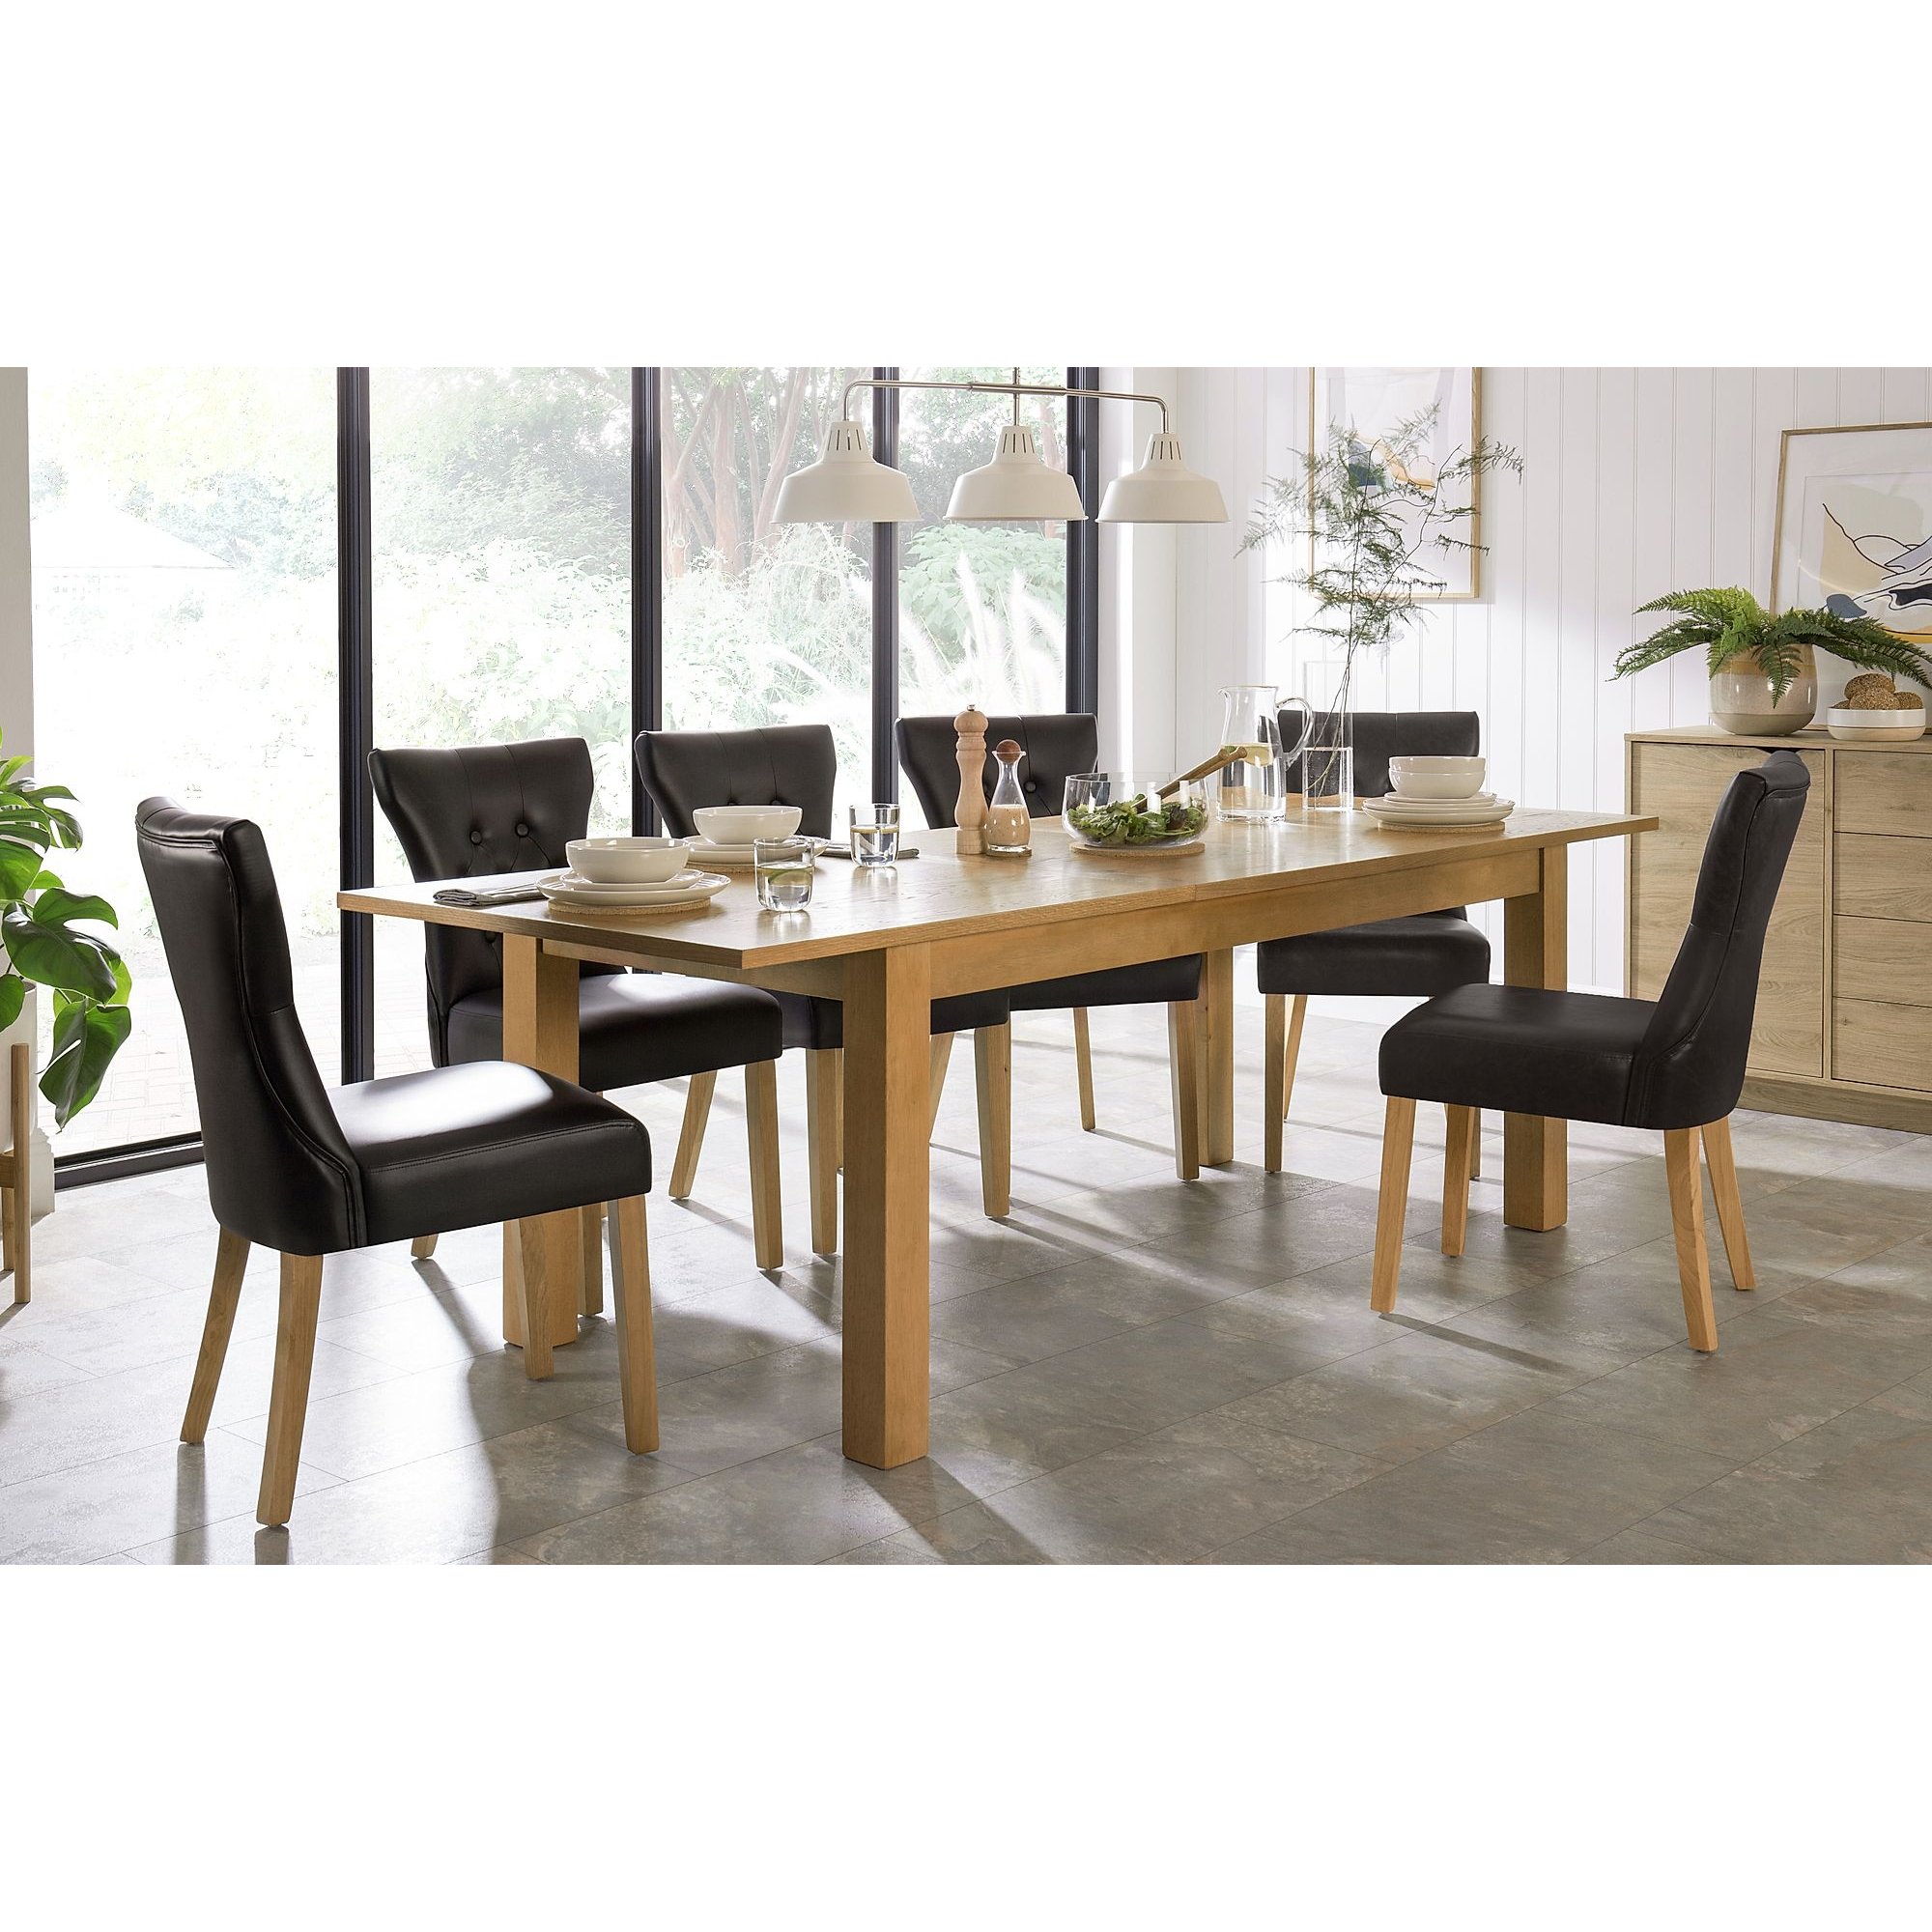 Hamilton 180-230cm Oak Extending Dining Table with 6 Bewley Black Leather Chairs